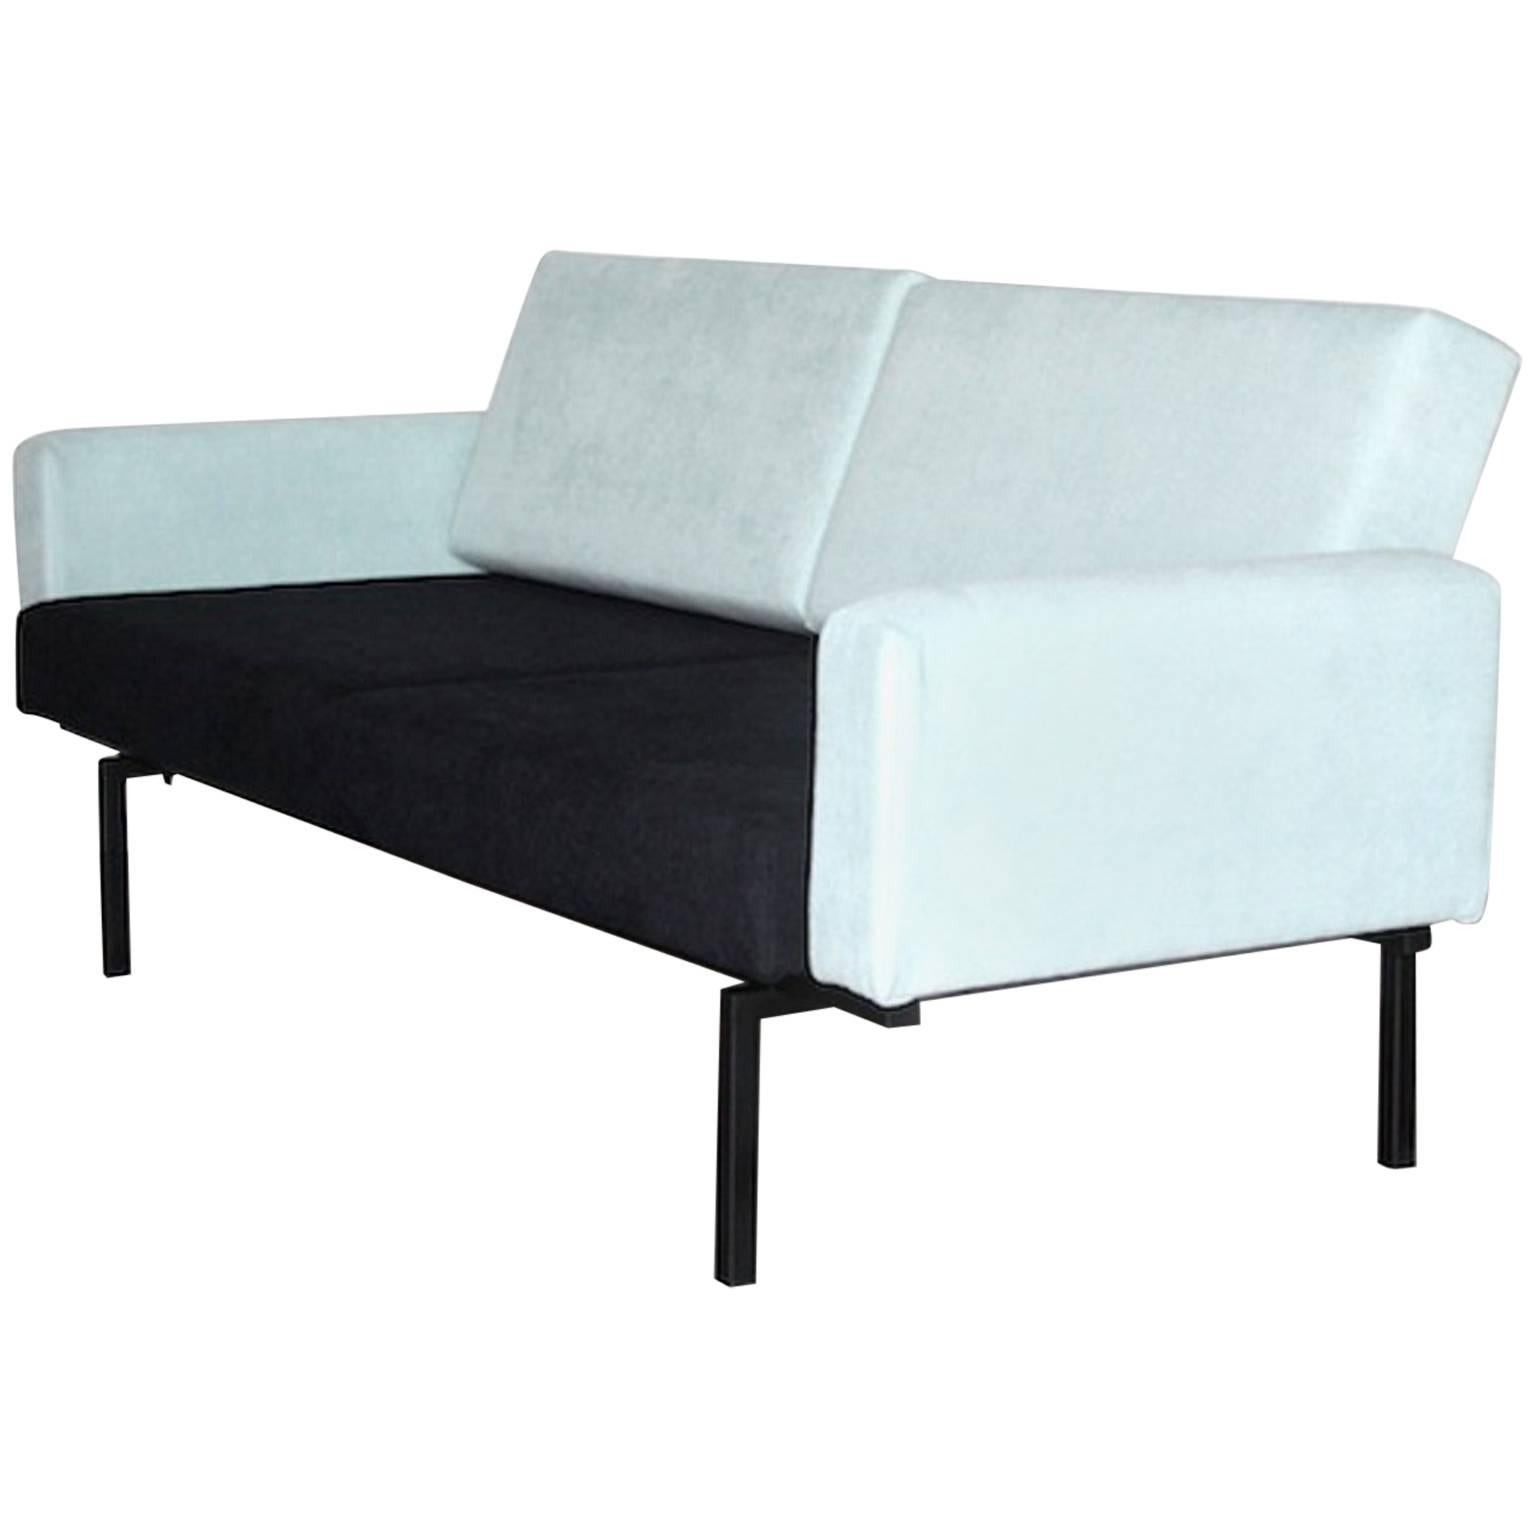 Sofa or Daybed by Coen de Vries for Devo, Dutch Design, 1952 For Sale